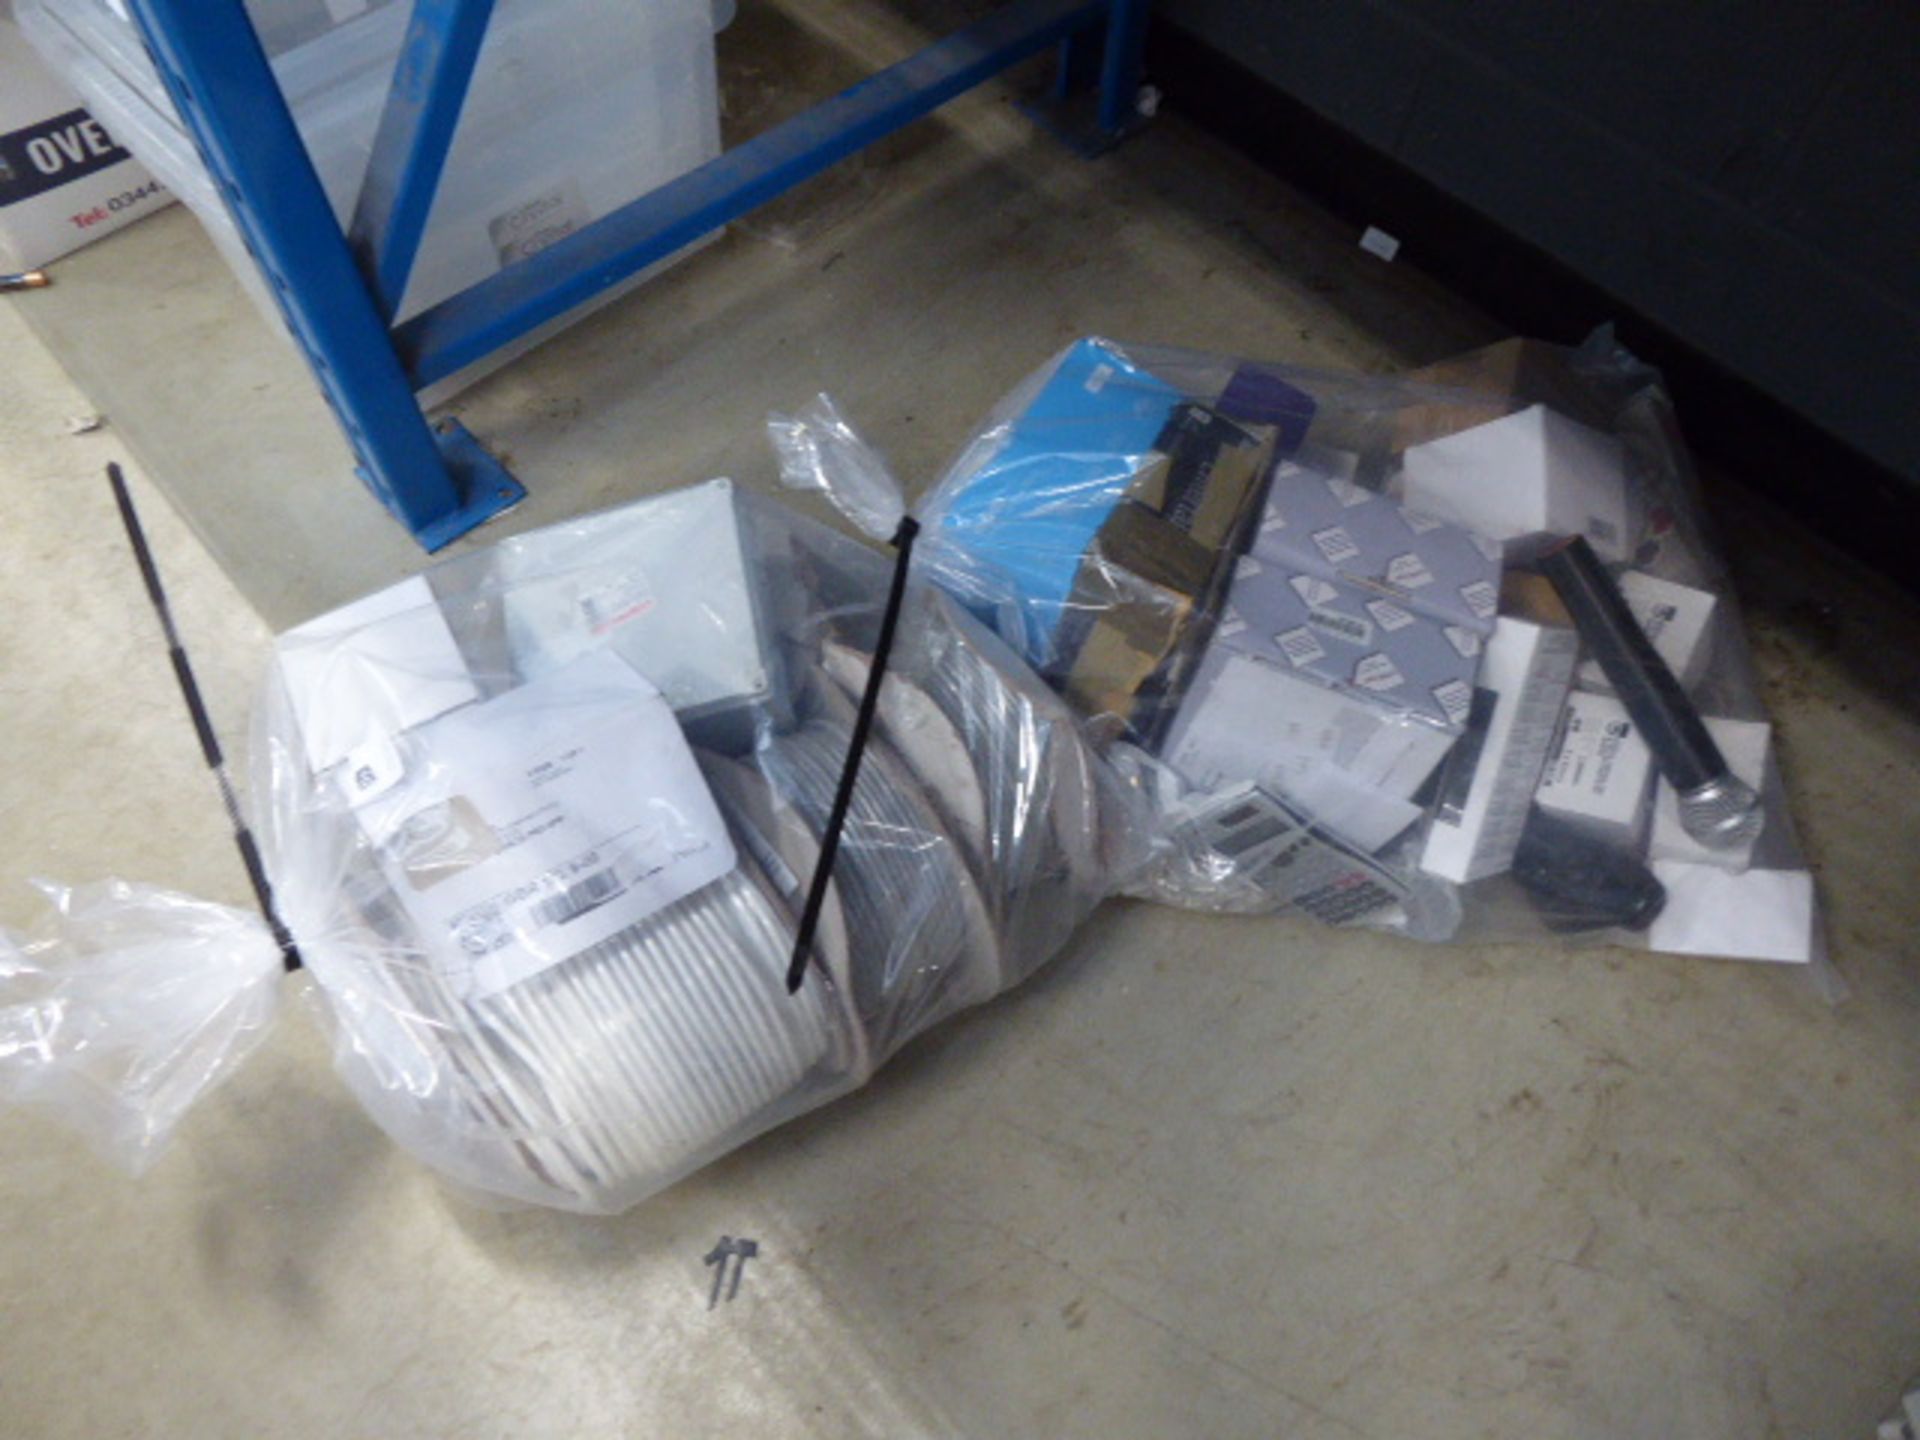 4348 2 bags containing cable, switches, sockets, microphones etc